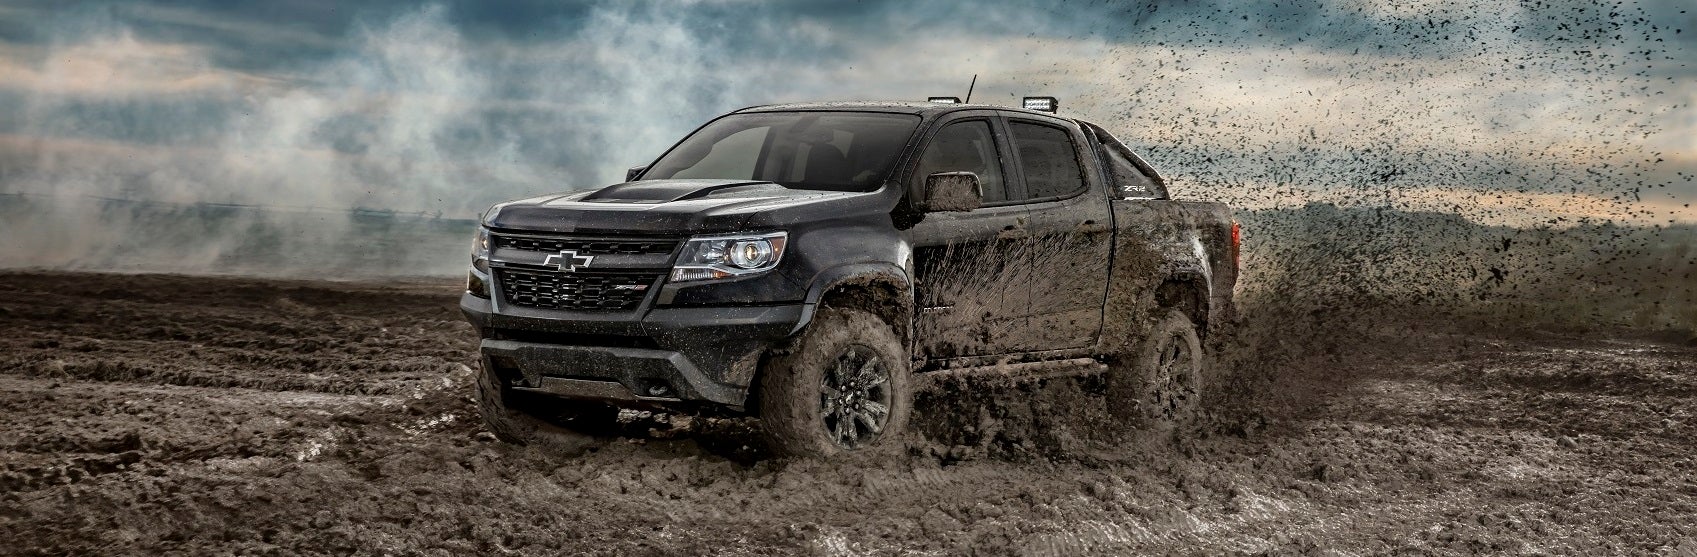 Chevy Colorado Inventory for Sale near Columbus, OH